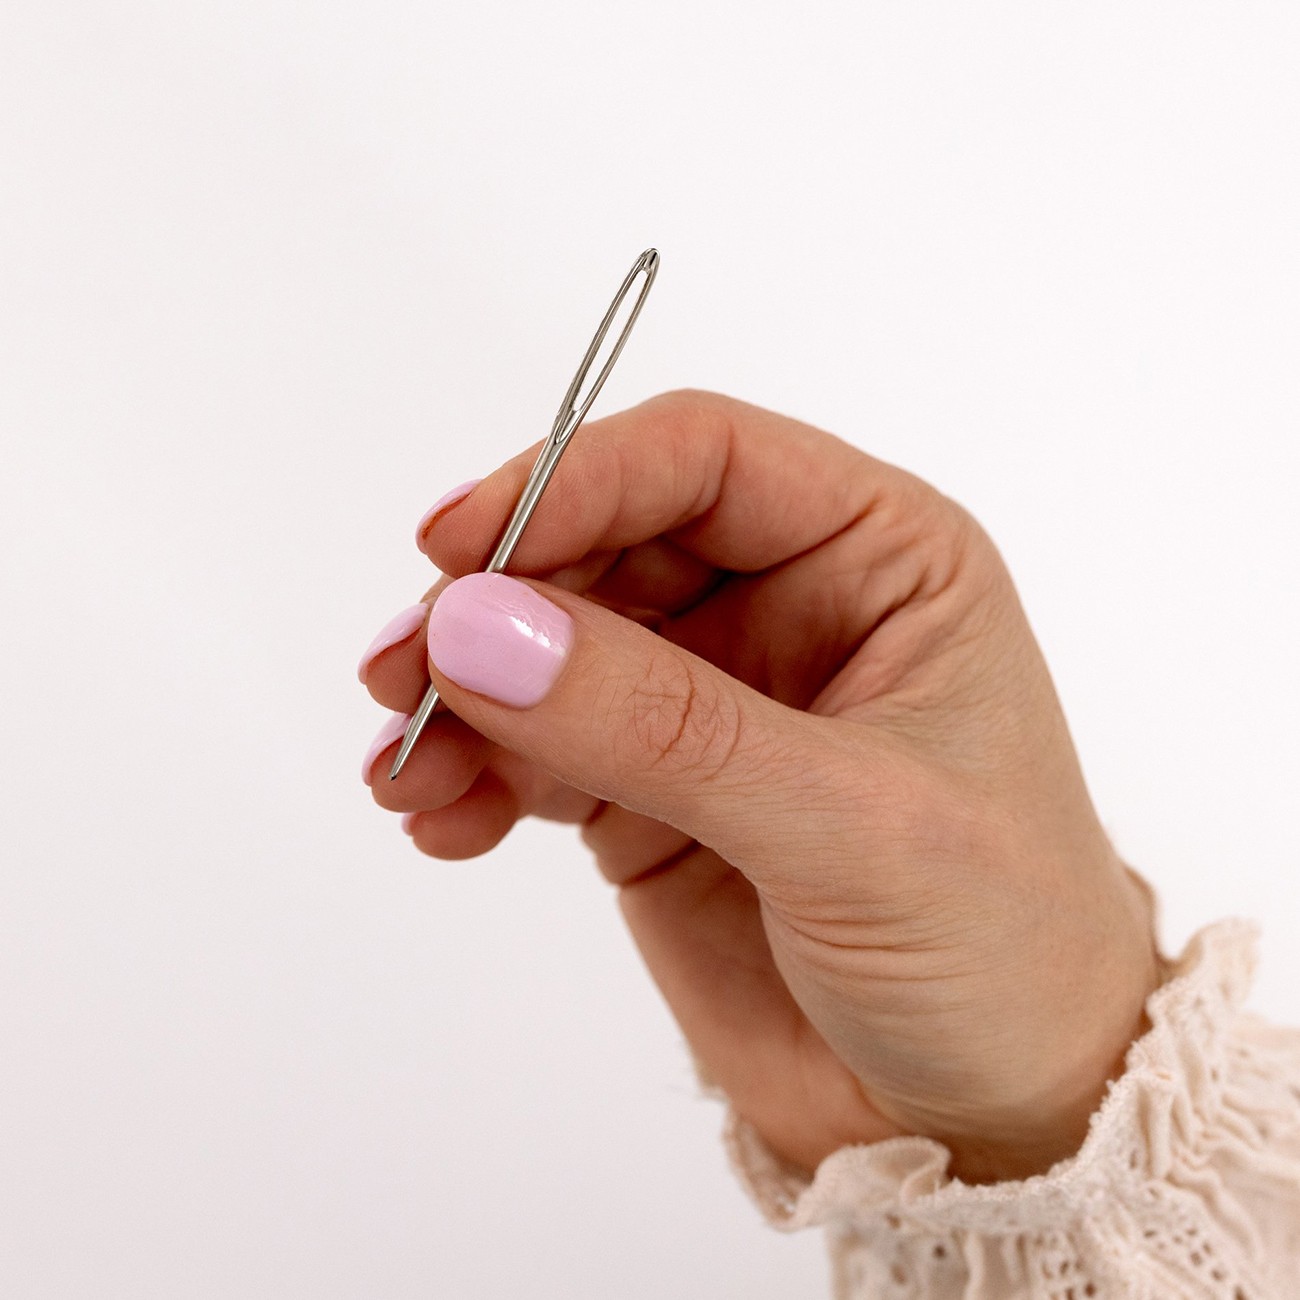 A hand holds a tapestry needle.